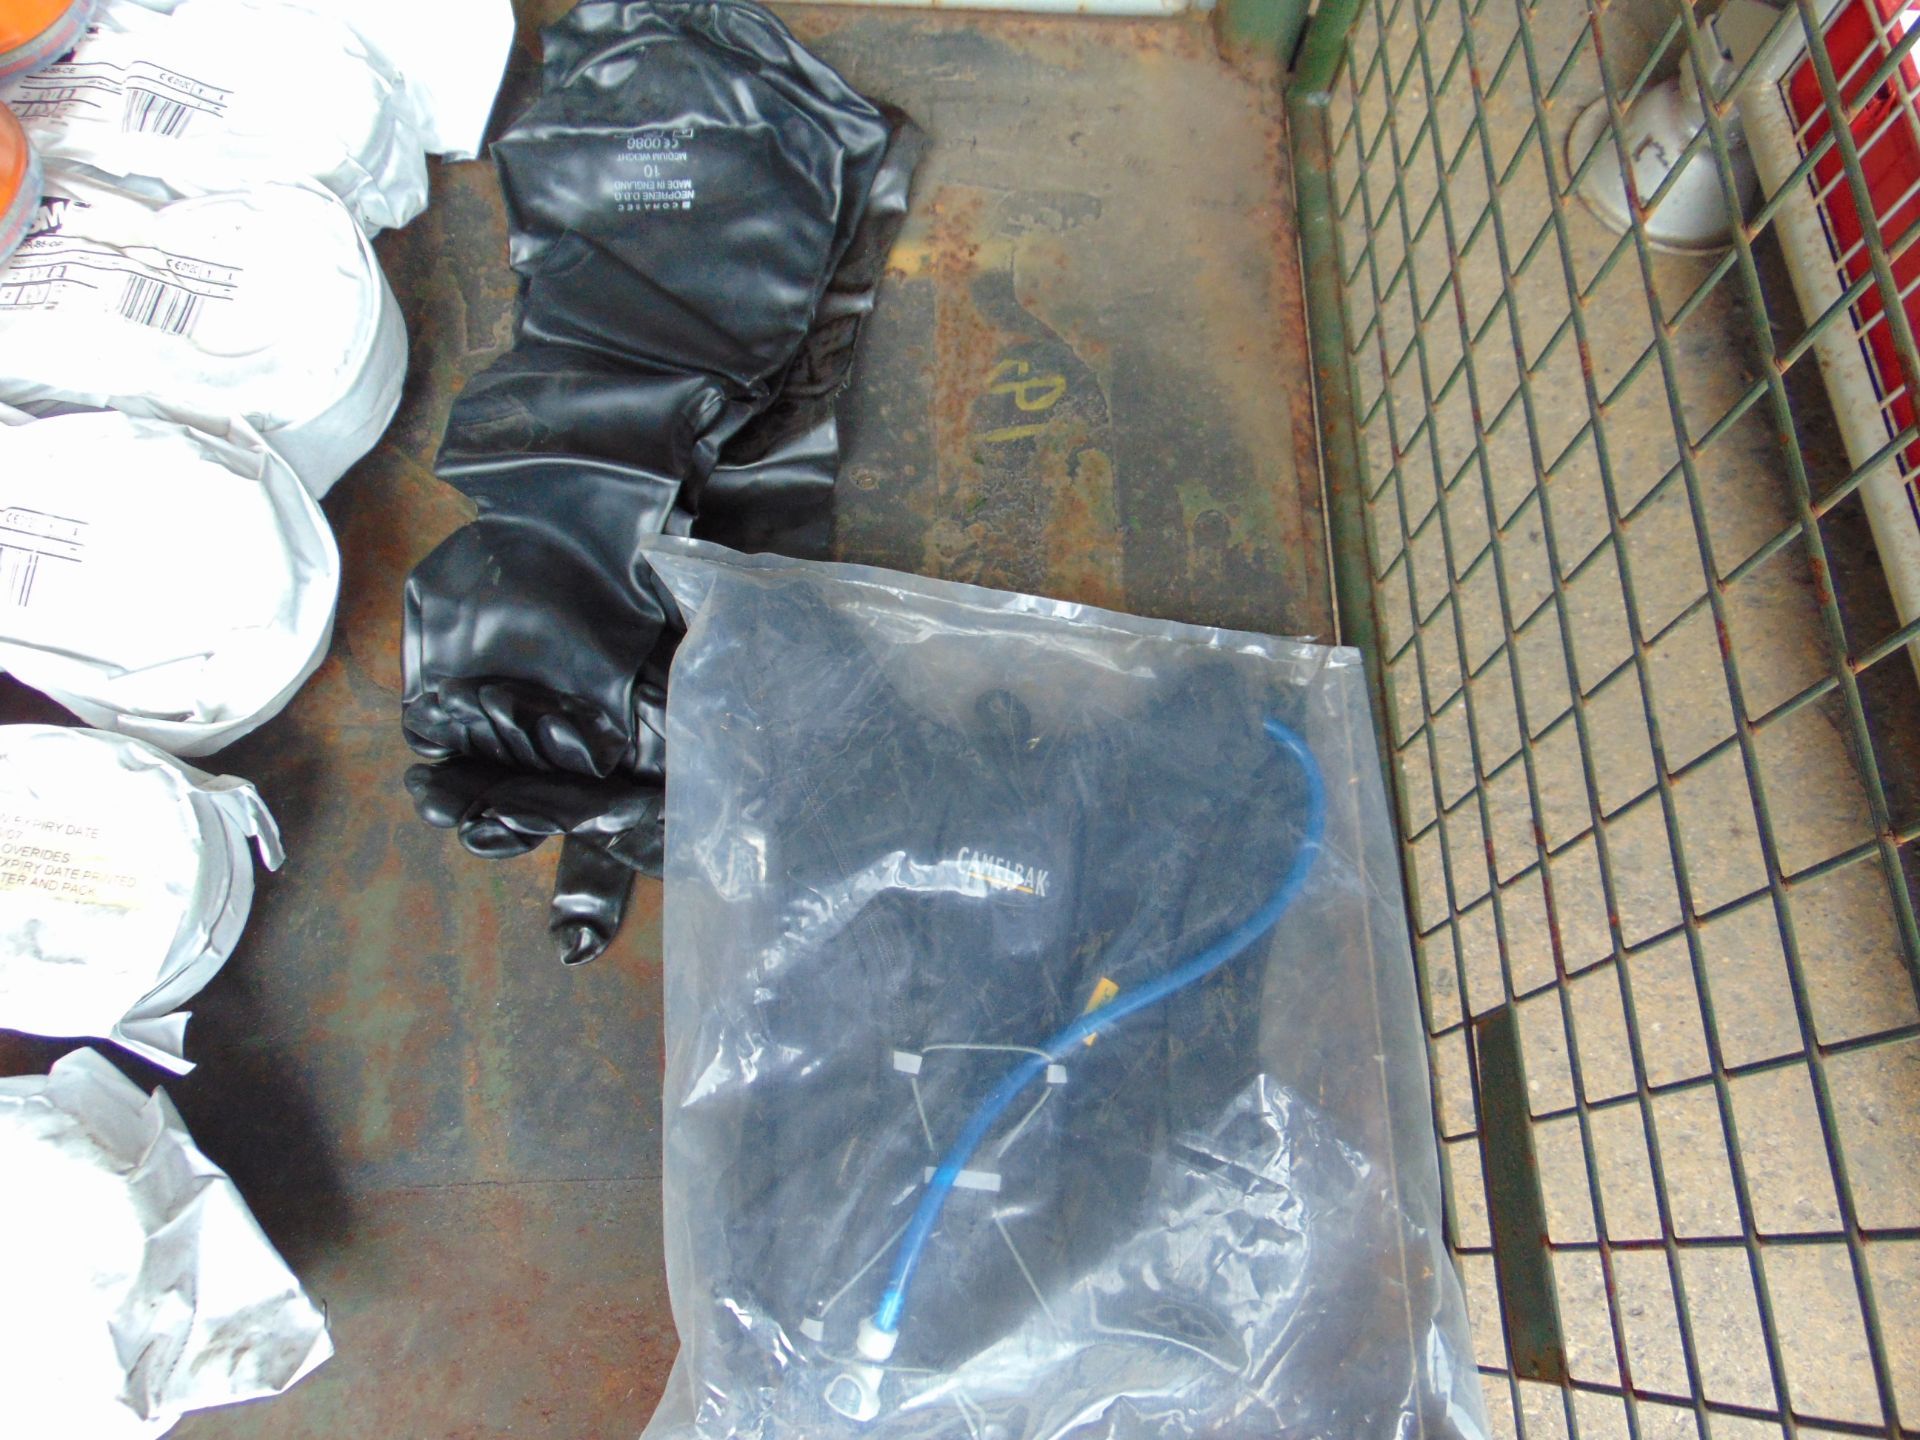 Stillage of 3M Filter Cartridges, Plastic Sheets, Camelback Personal Hydrator, HD Rubber Gloves etc. - Image 3 of 5